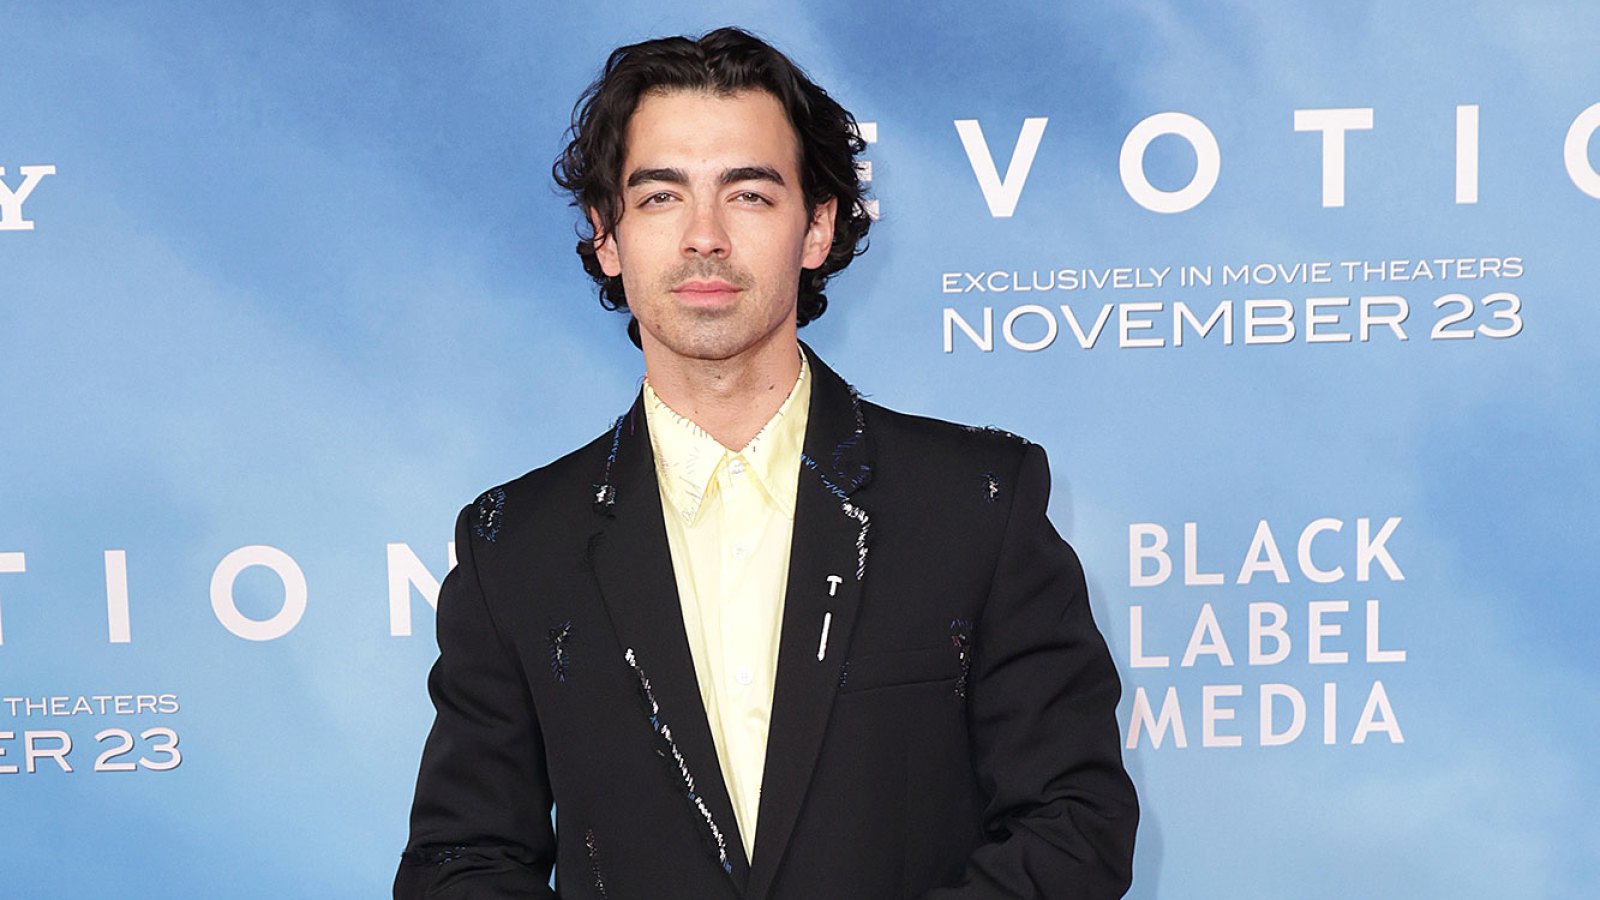 Joe Jonas Blatantly Displays Wedding Ring Again as Questions Continue About Sophie Turner Marriage